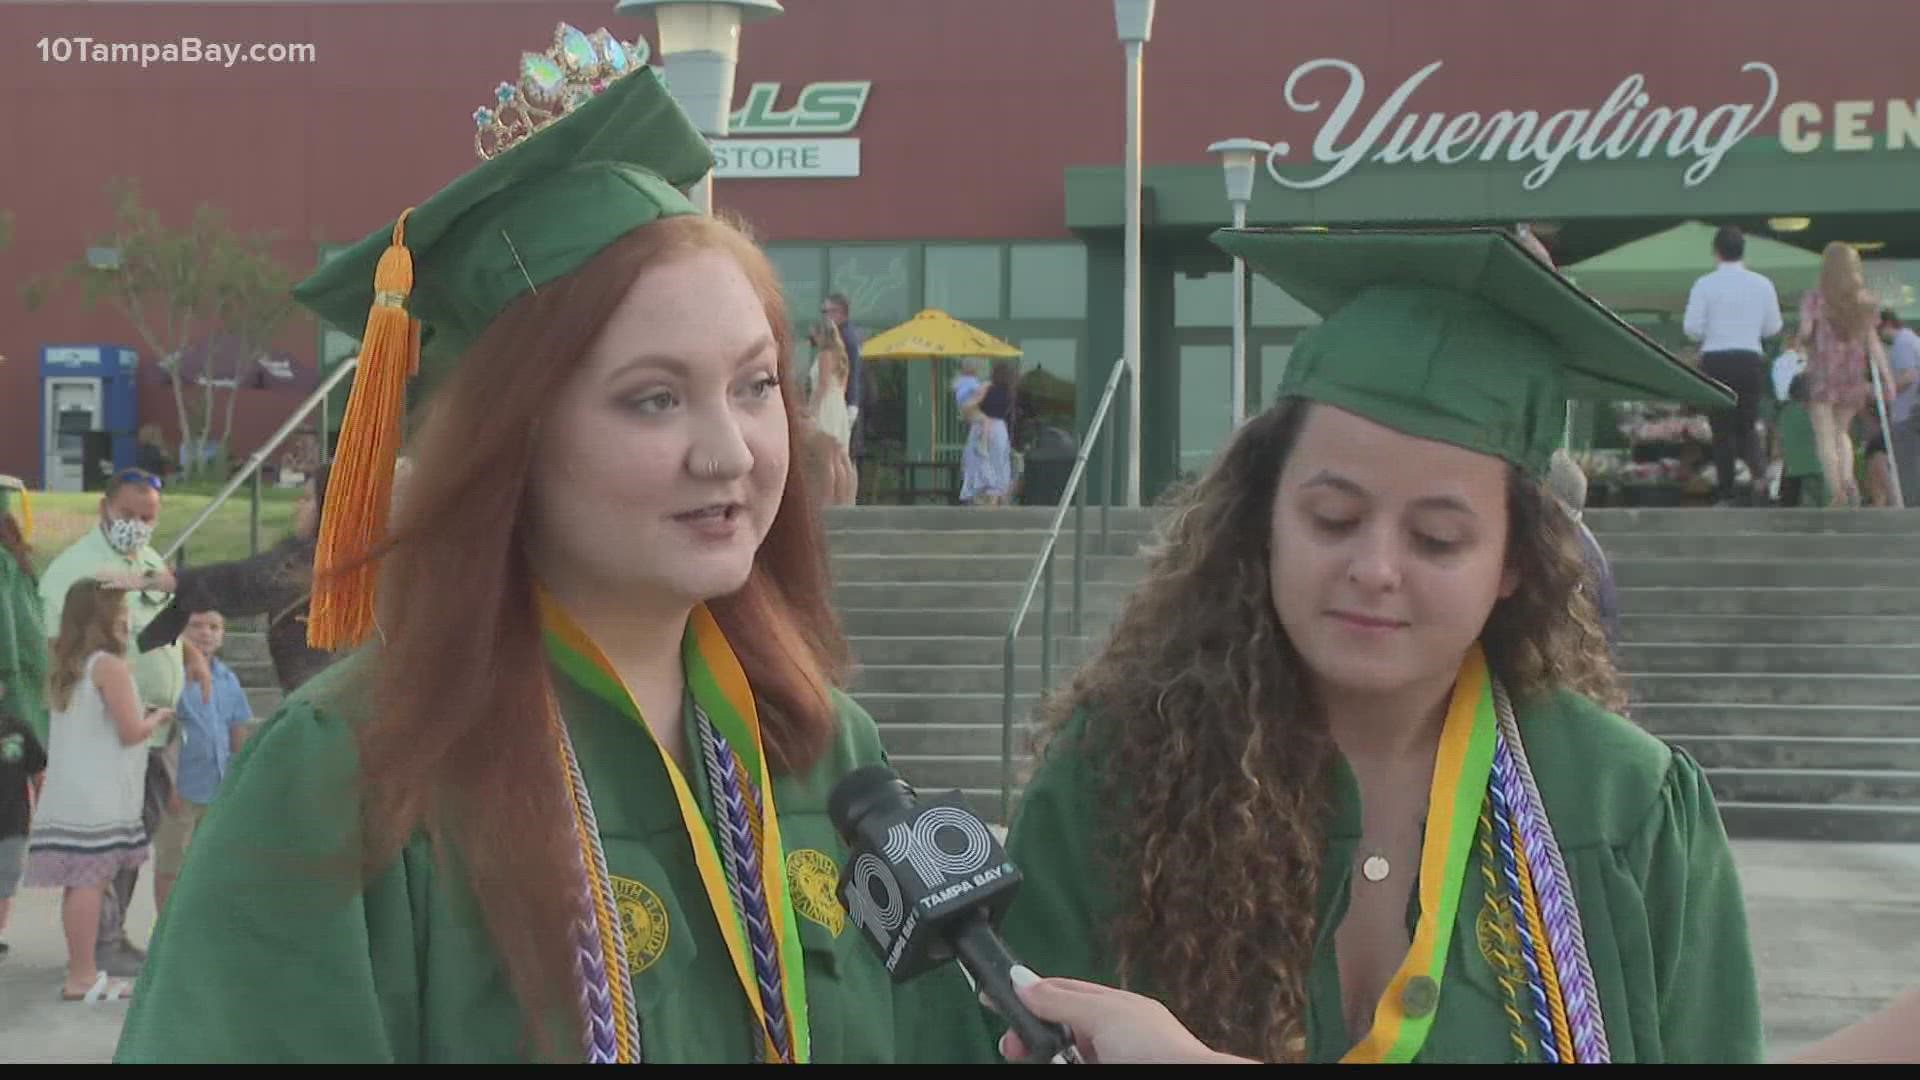 COVID-19 canceled graduations across the country over the last 2 years; USF holds a ceremony to celebrate those who weren't able to previously walk across the stage.